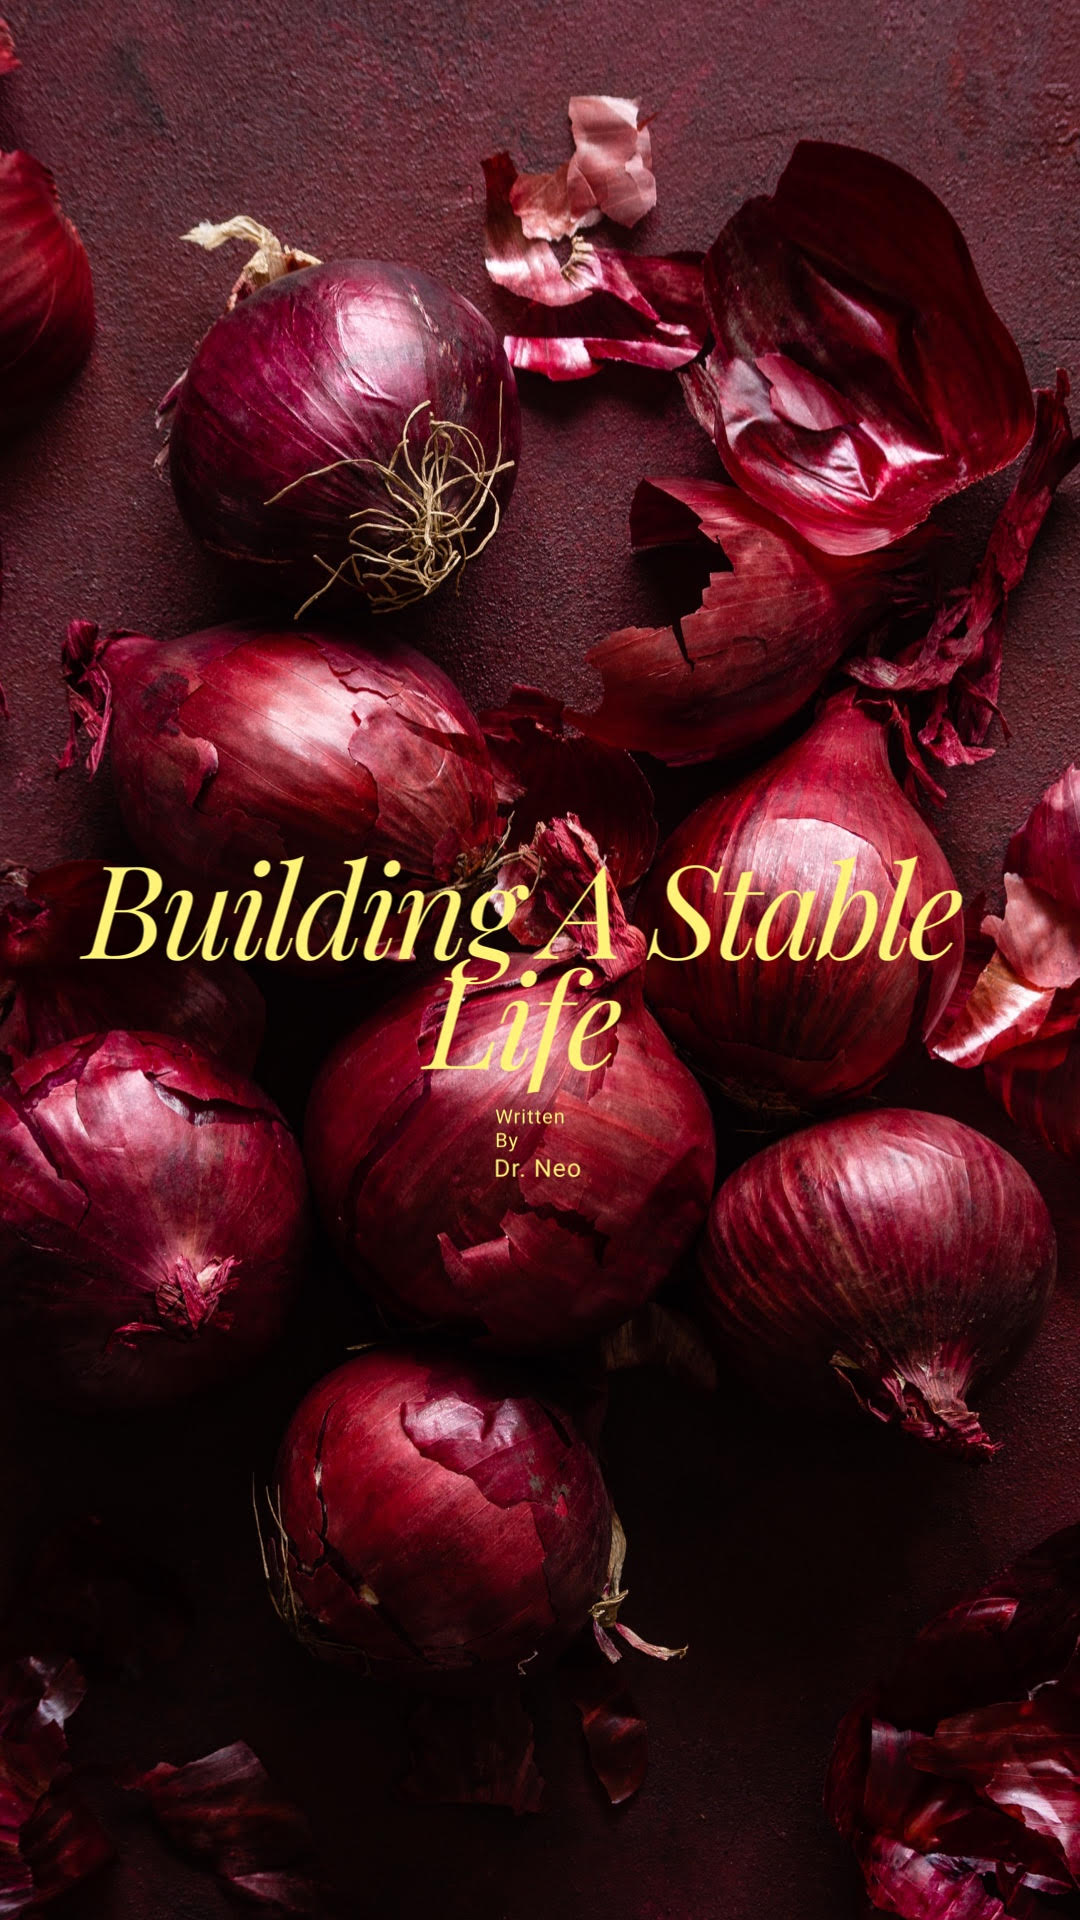 BUILDING A STABLE LIFE